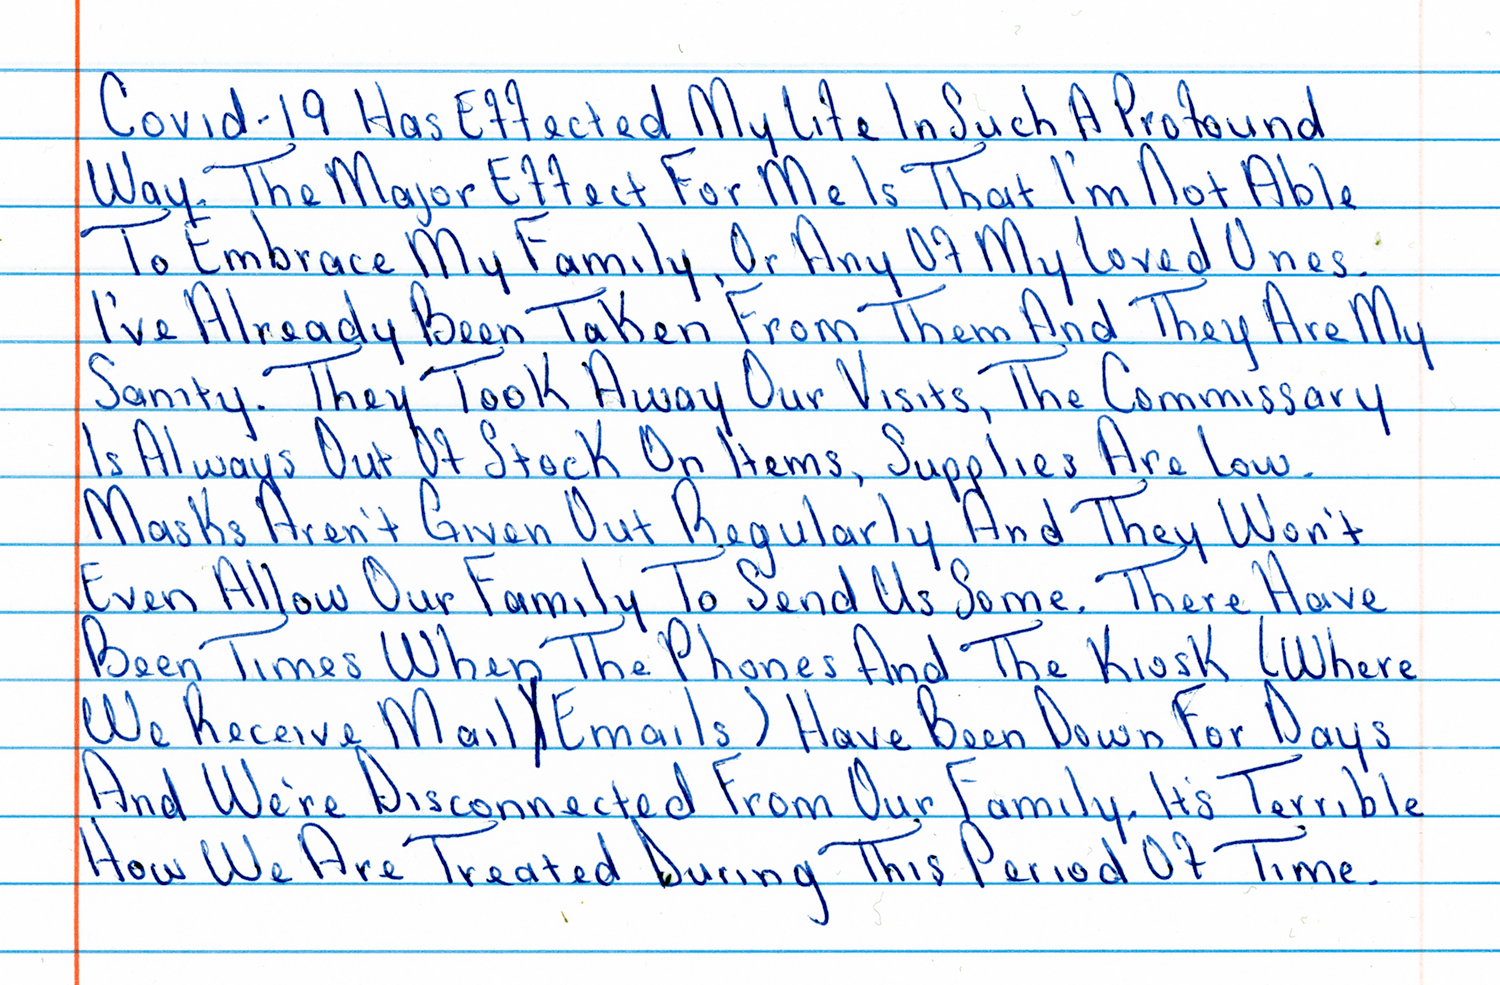 Handwritten note from Tiana: “Covid-19 has effected my life in such a profound way. The major effect for me is that
I'm not able to embrace my family, or any of my loved ones. I've already been taken
from them and they're my sanity. They took away our visits, the commissary is always
out of stock on items, supplies are low. Masks aren't given out regularly and they won't
even allow out family to send us some. There have been times when the phones and
the kiosk (where we receive email) have been down for days and we're disconnected
from our family. It’s terrible how we are treated during this period of time.”